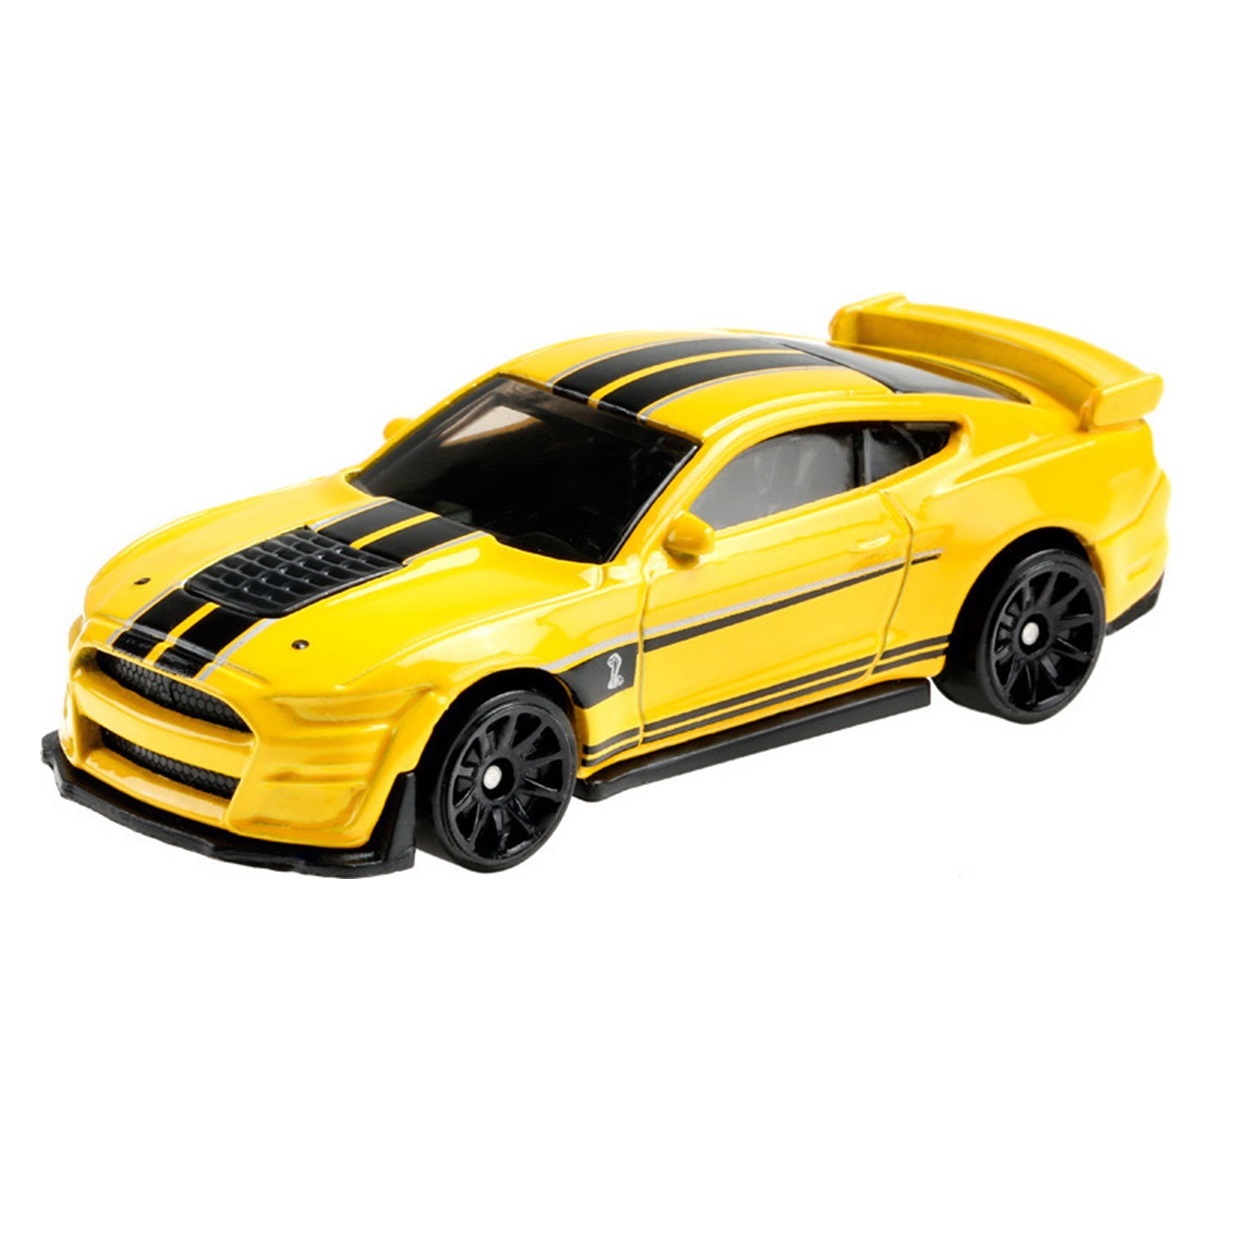 2020 Ford Mustang Shelby Gt500 4/5 Hot Wheels Hw Torque